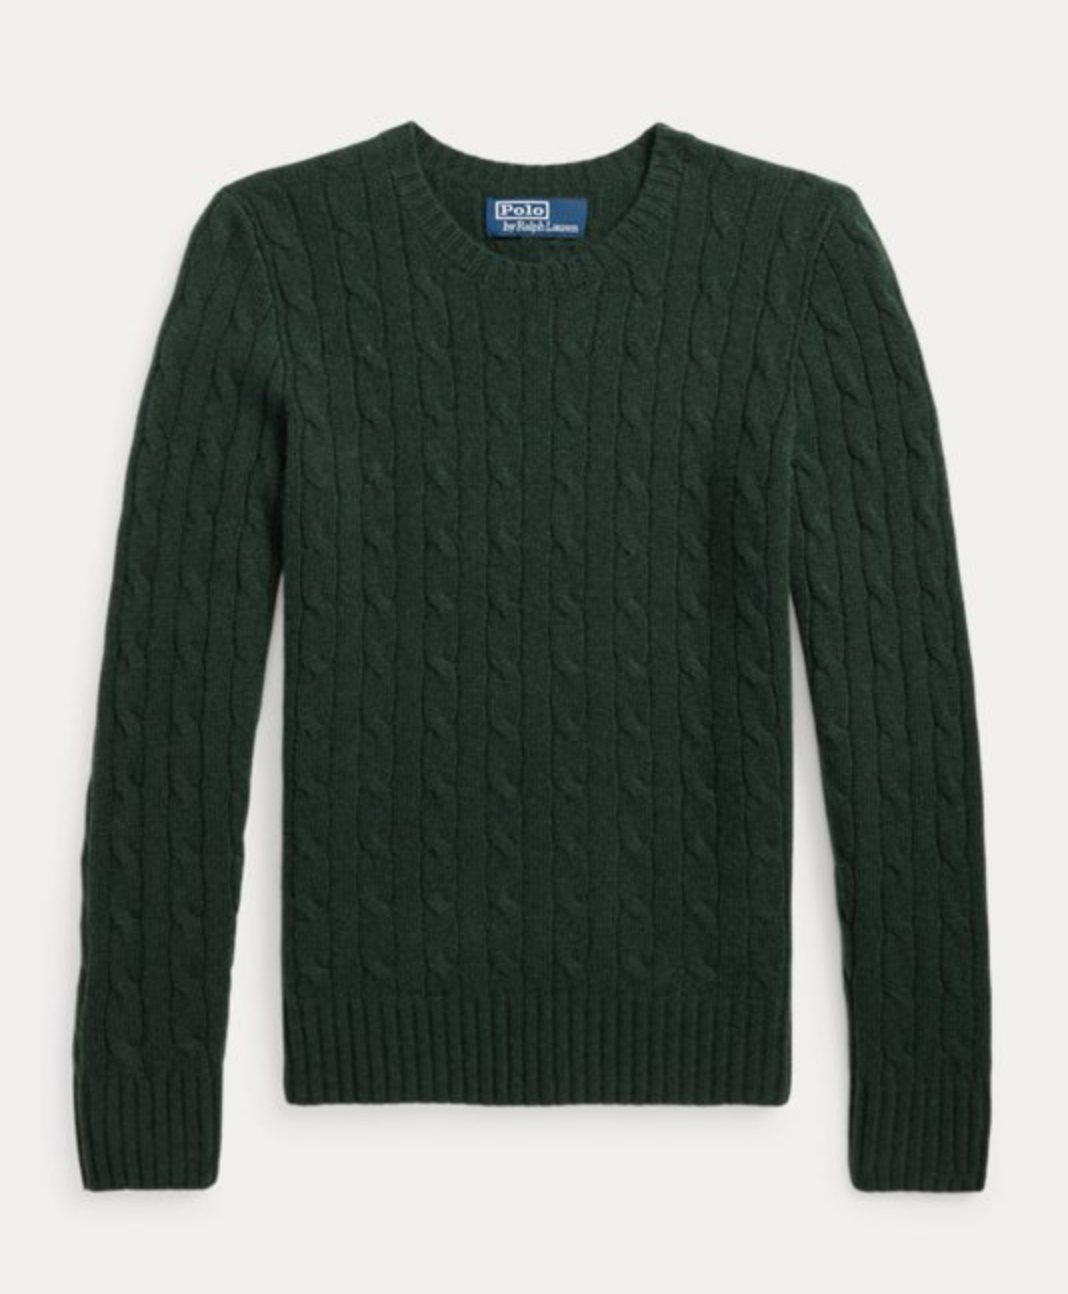 Polo Ralph Lauren Cable-Knit Cashmere Sweater in Dark Green — UFO No More